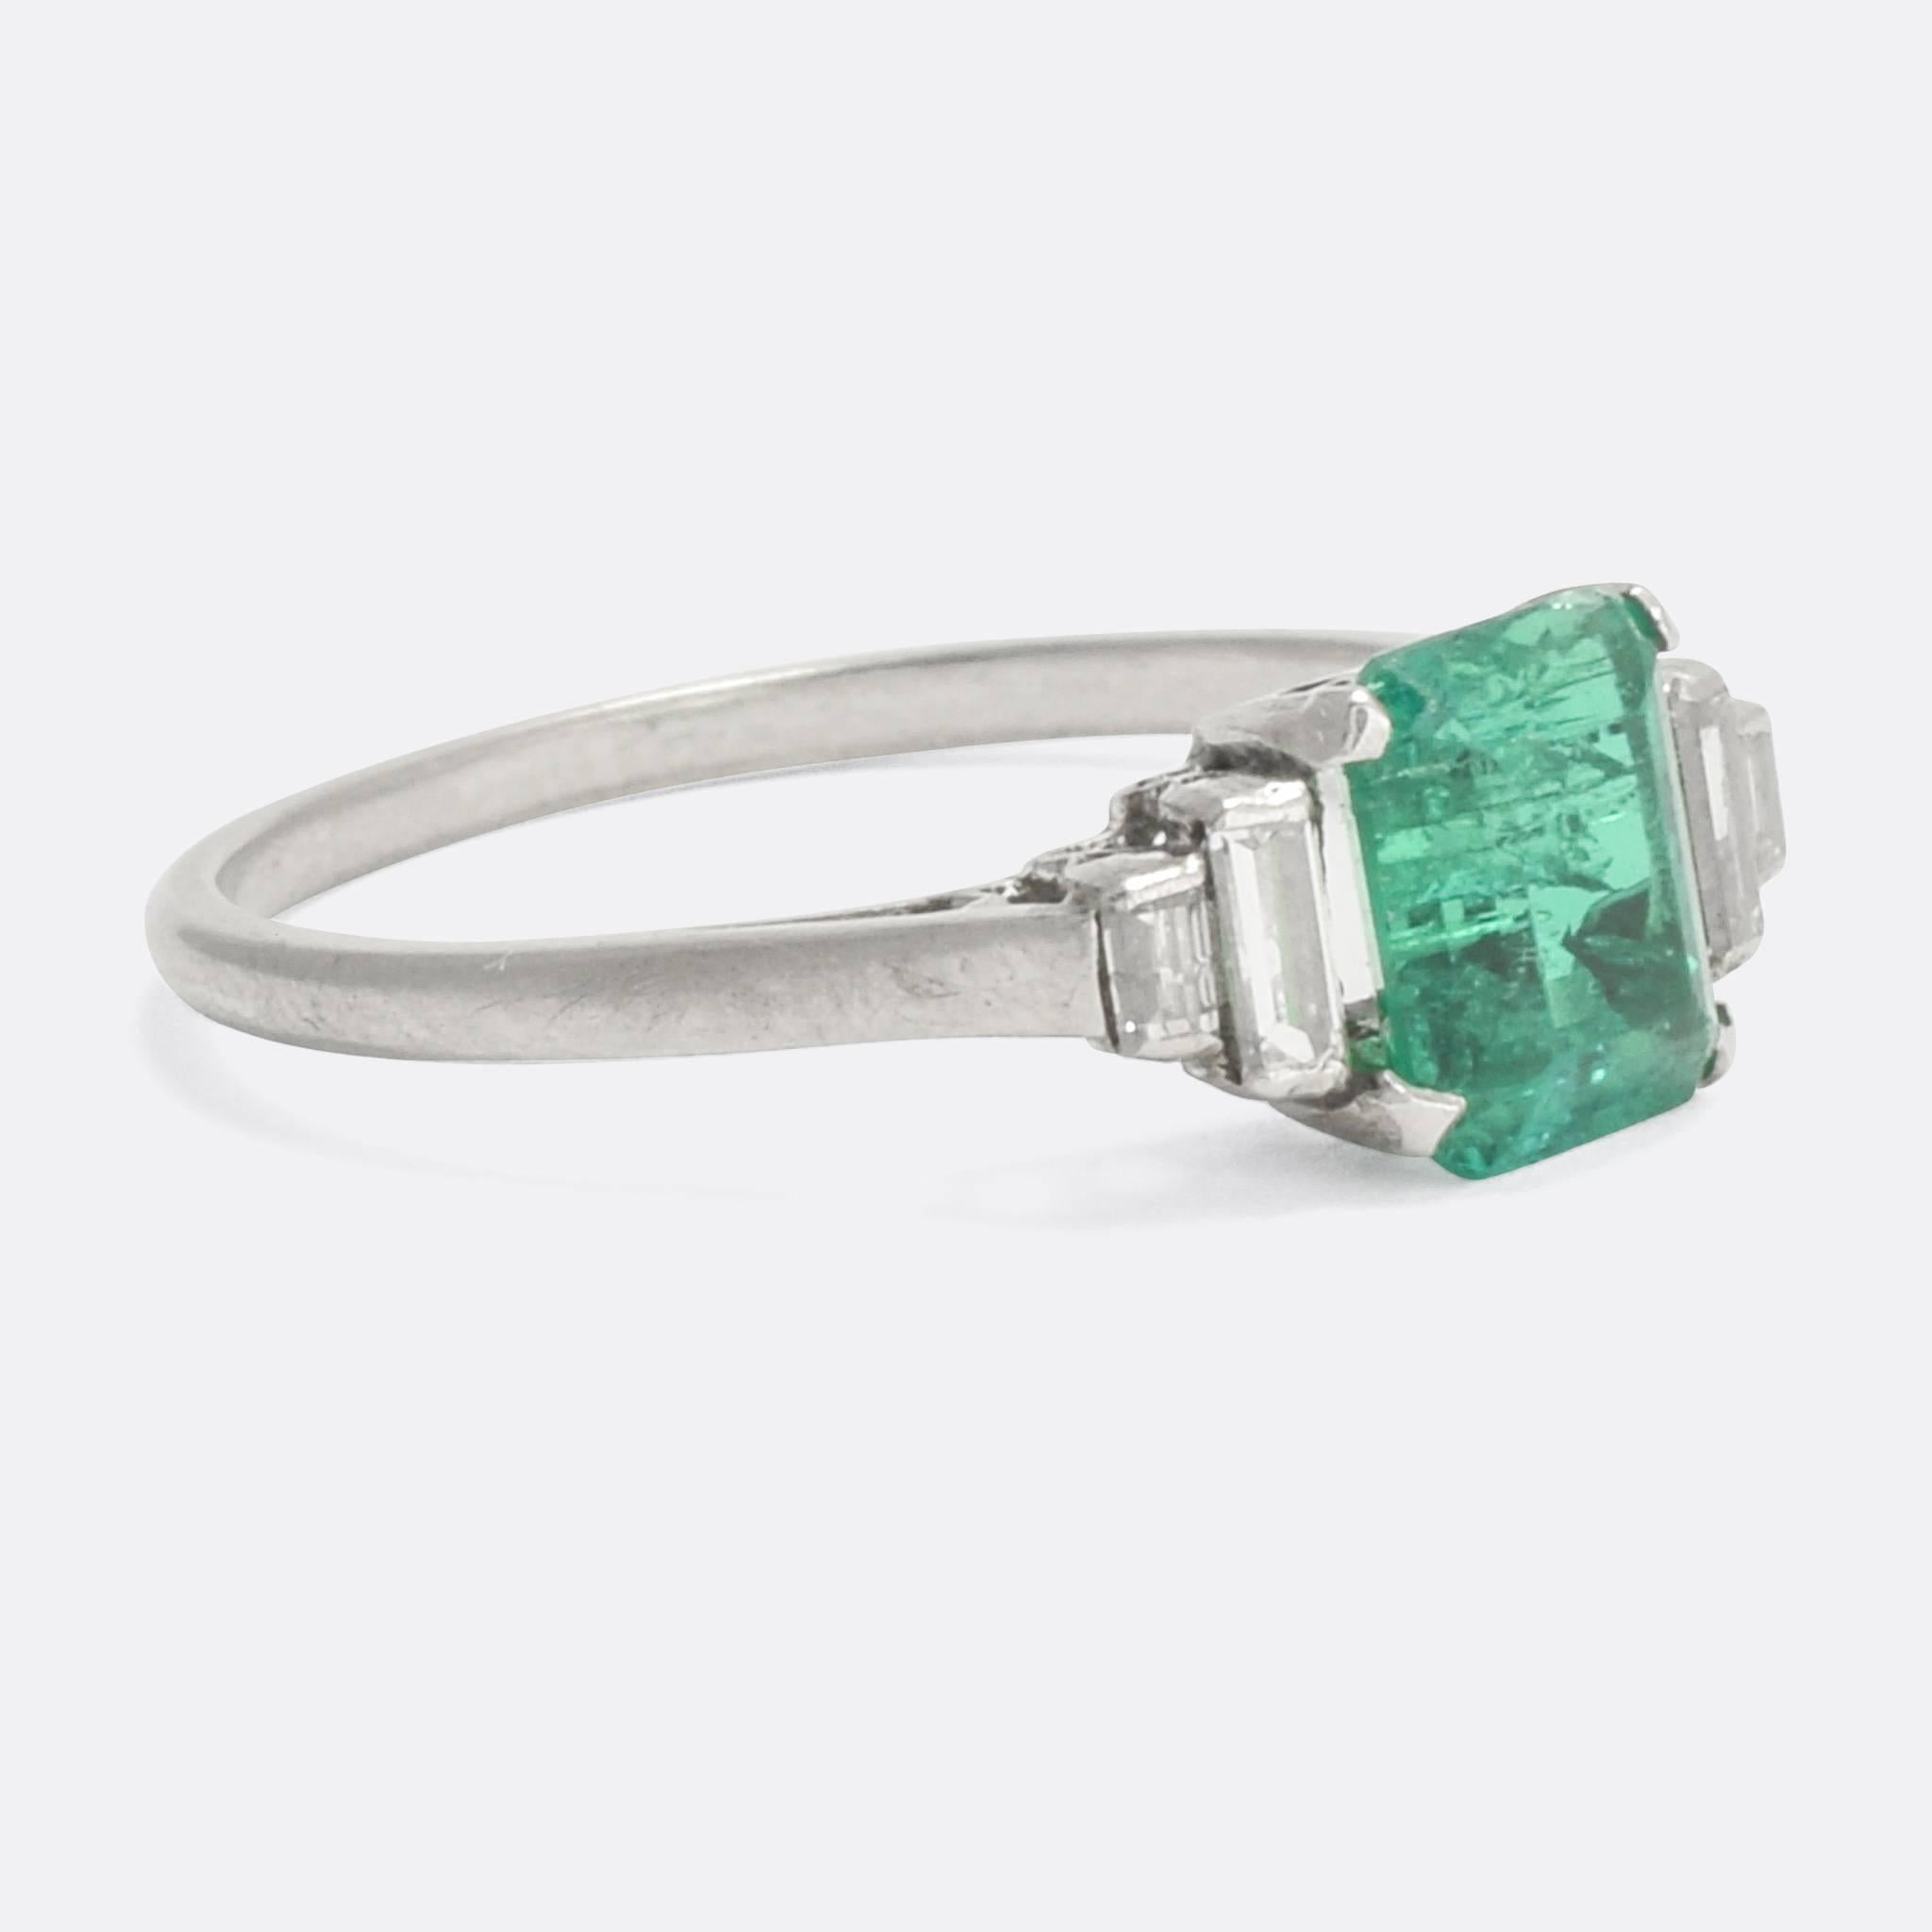 A stunning Art Deco era Emerald and baguette Diamond ring modelled in platinum throughout. It's impeccably styled - dating from c.1930 - and features fine openwork to the gallery, allowing plenty of light in behind the stones. The natural emerald is